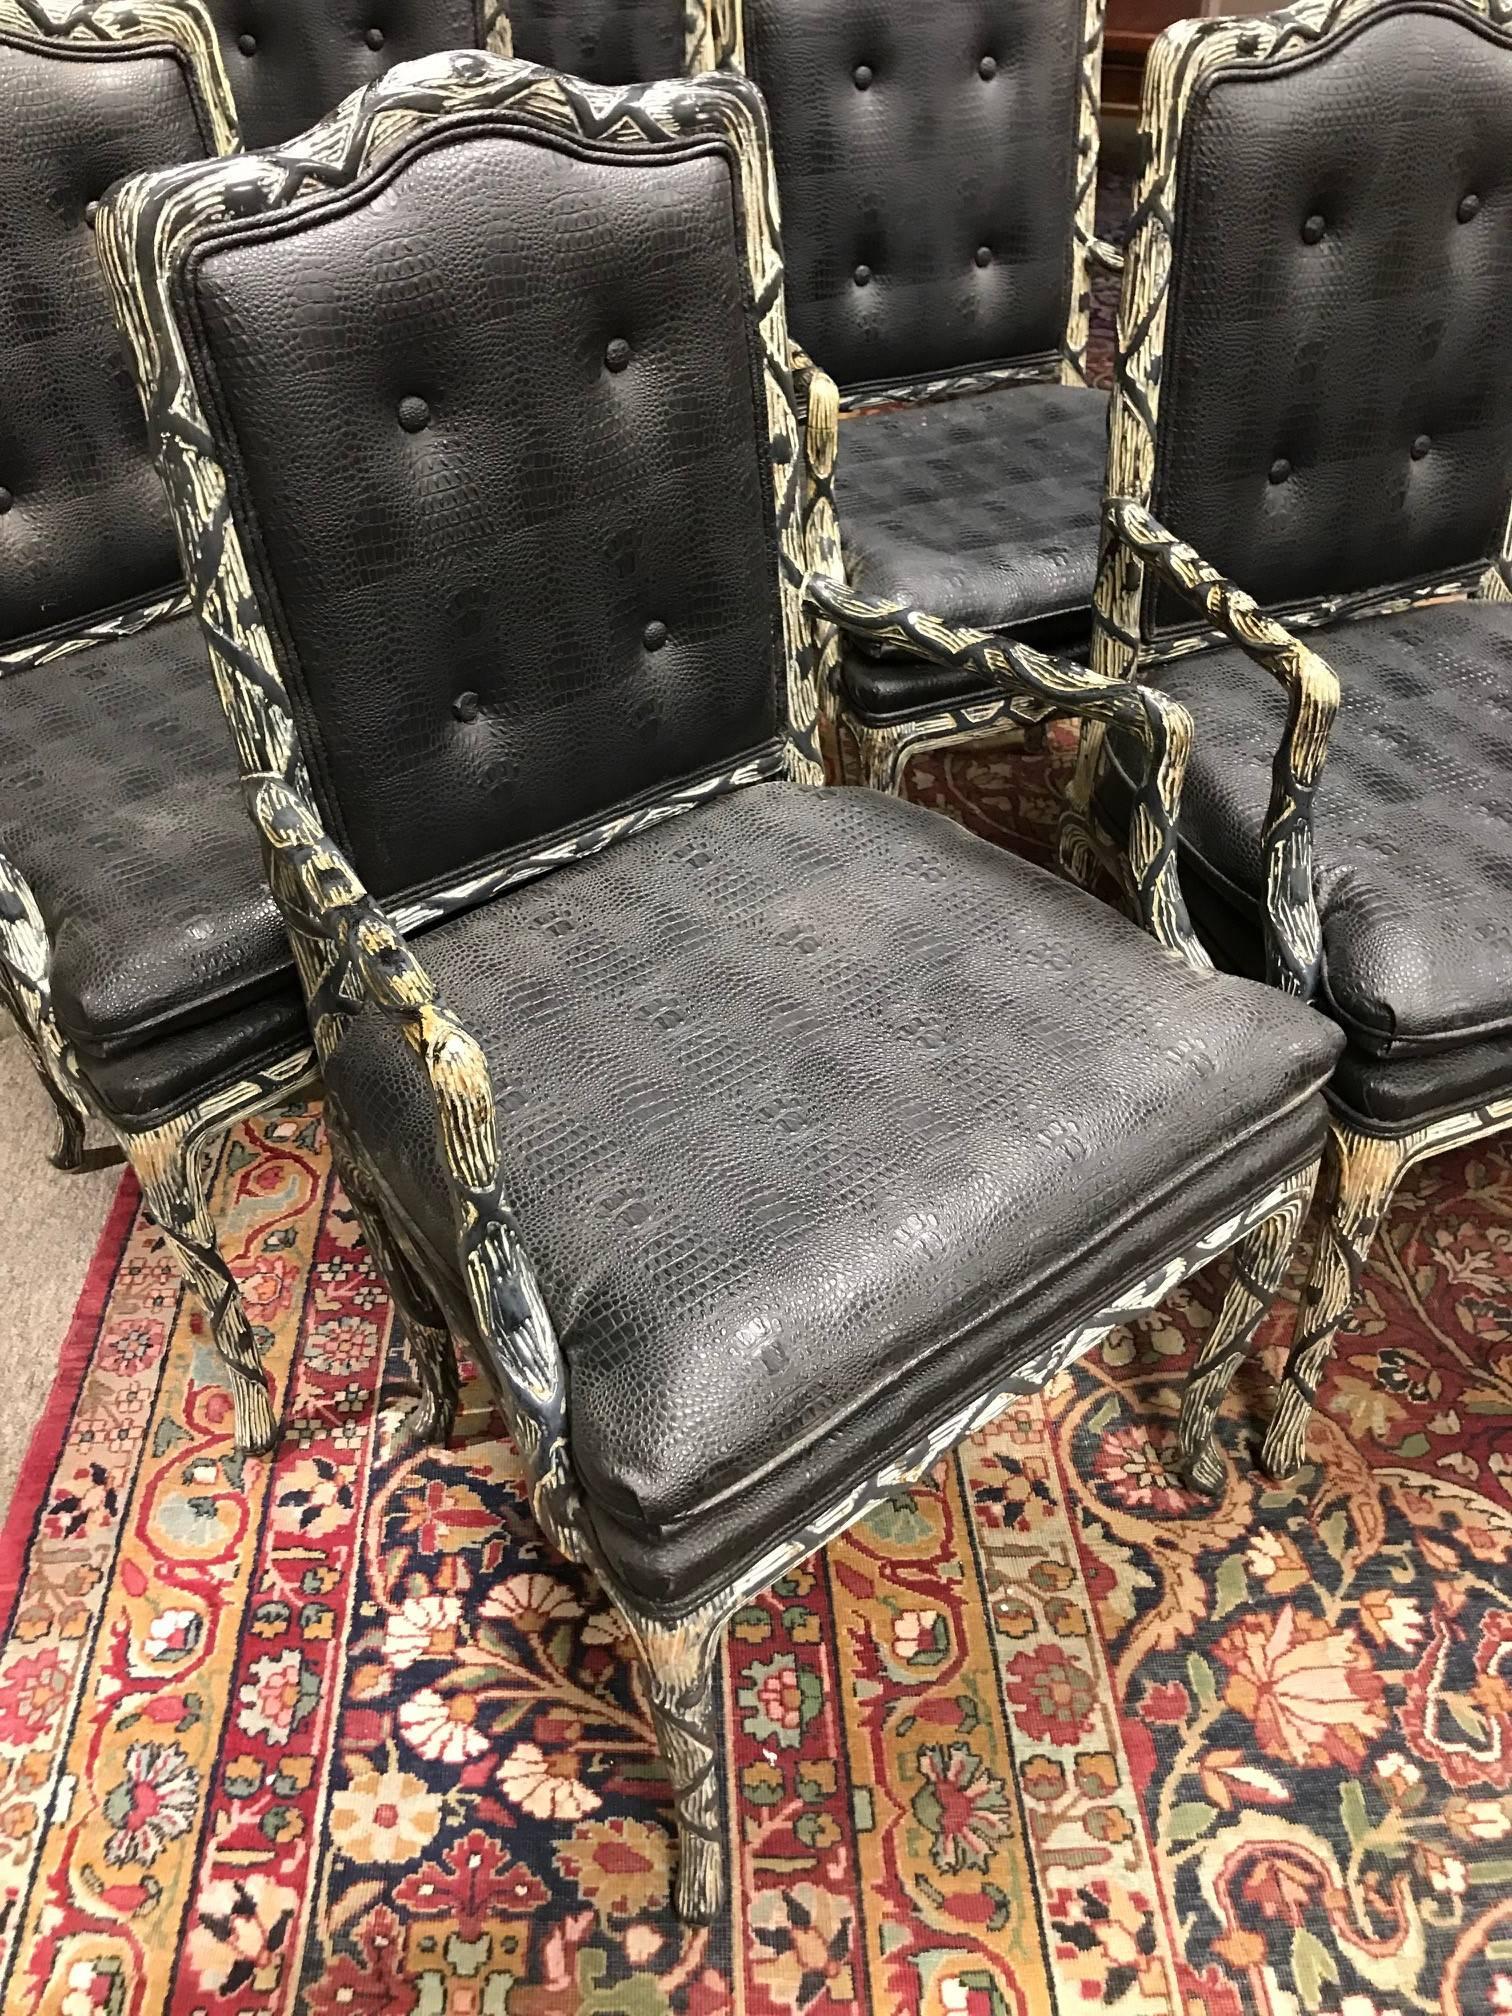 Fabulous set of 6 custom French styled open armchairs hand-crafted in Italy with lacquered ebonized finish and faux alligator fabric upholstered seats and backs. Nice contoured serpentine-shaped crestrails.

Circa: 1995

All in very good